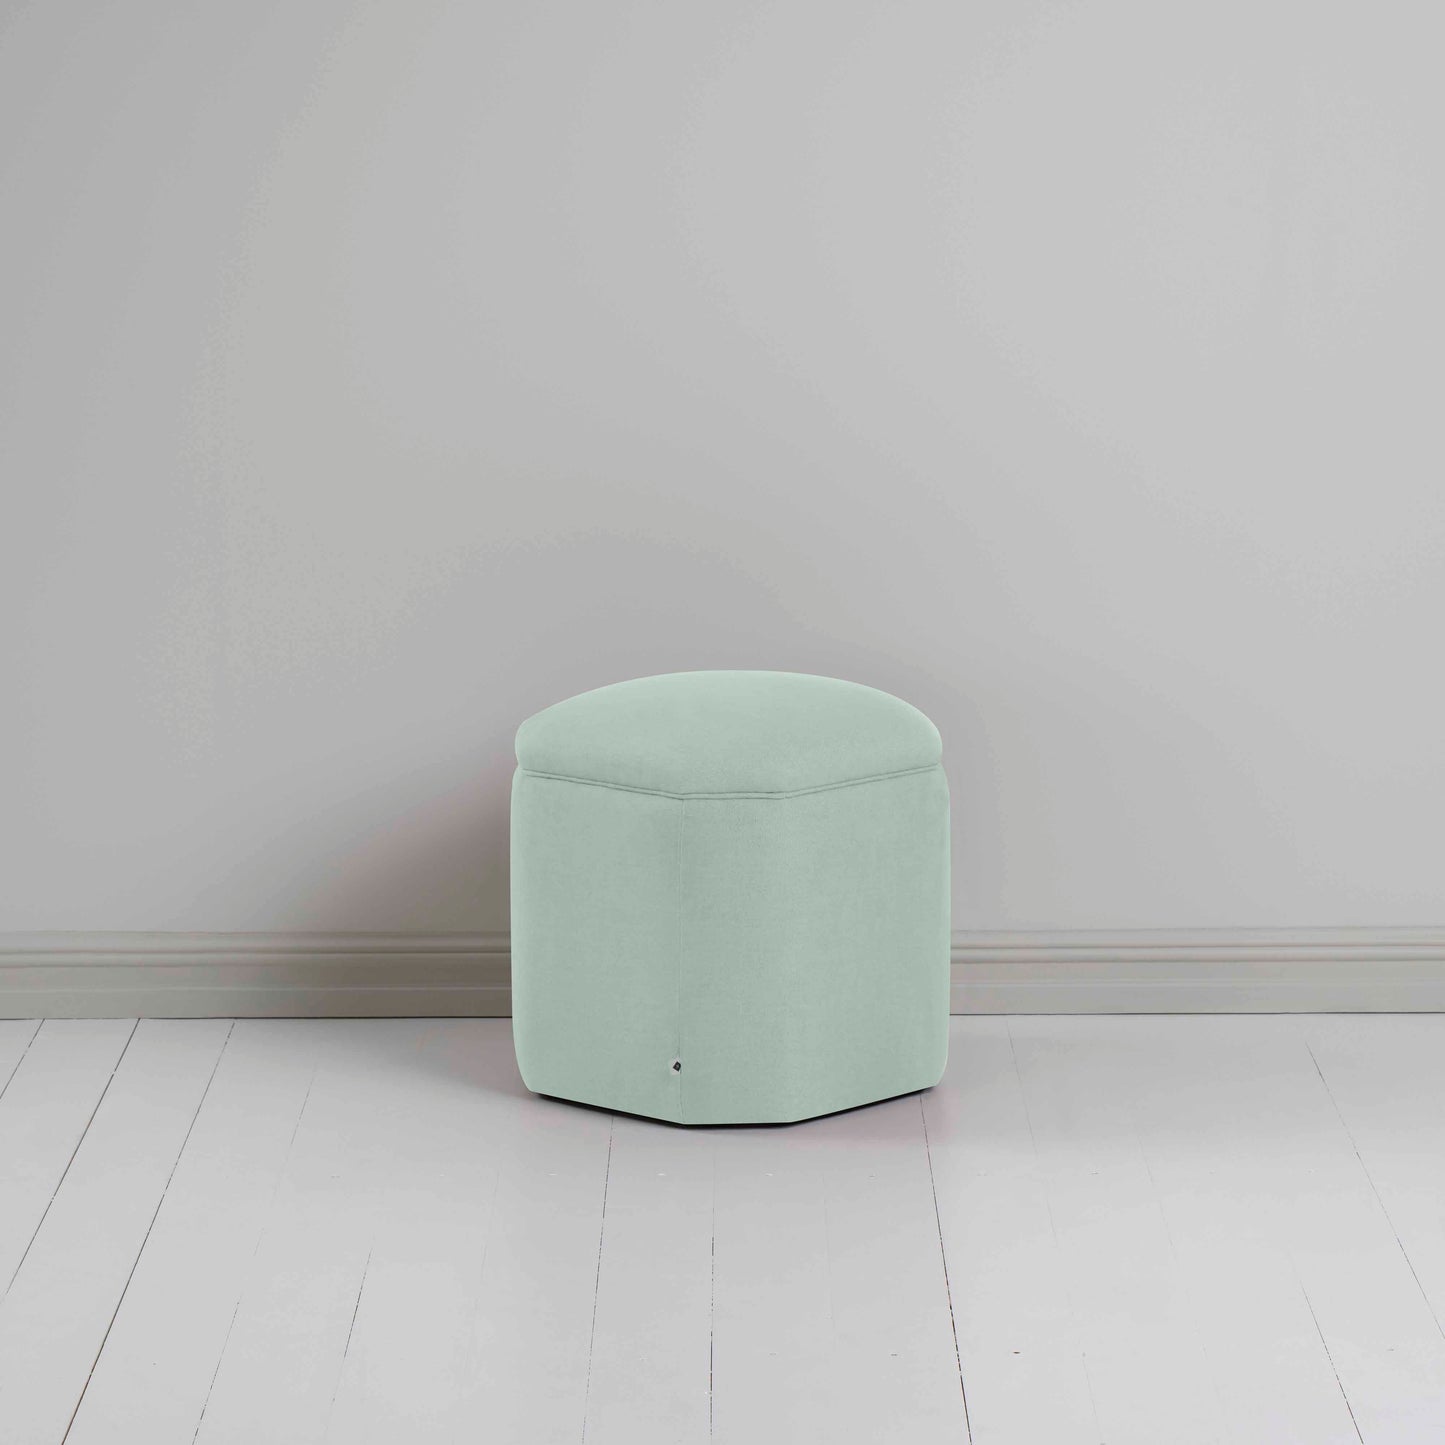 Thither Hexagonal Ottoman in Laidback Linen Sky